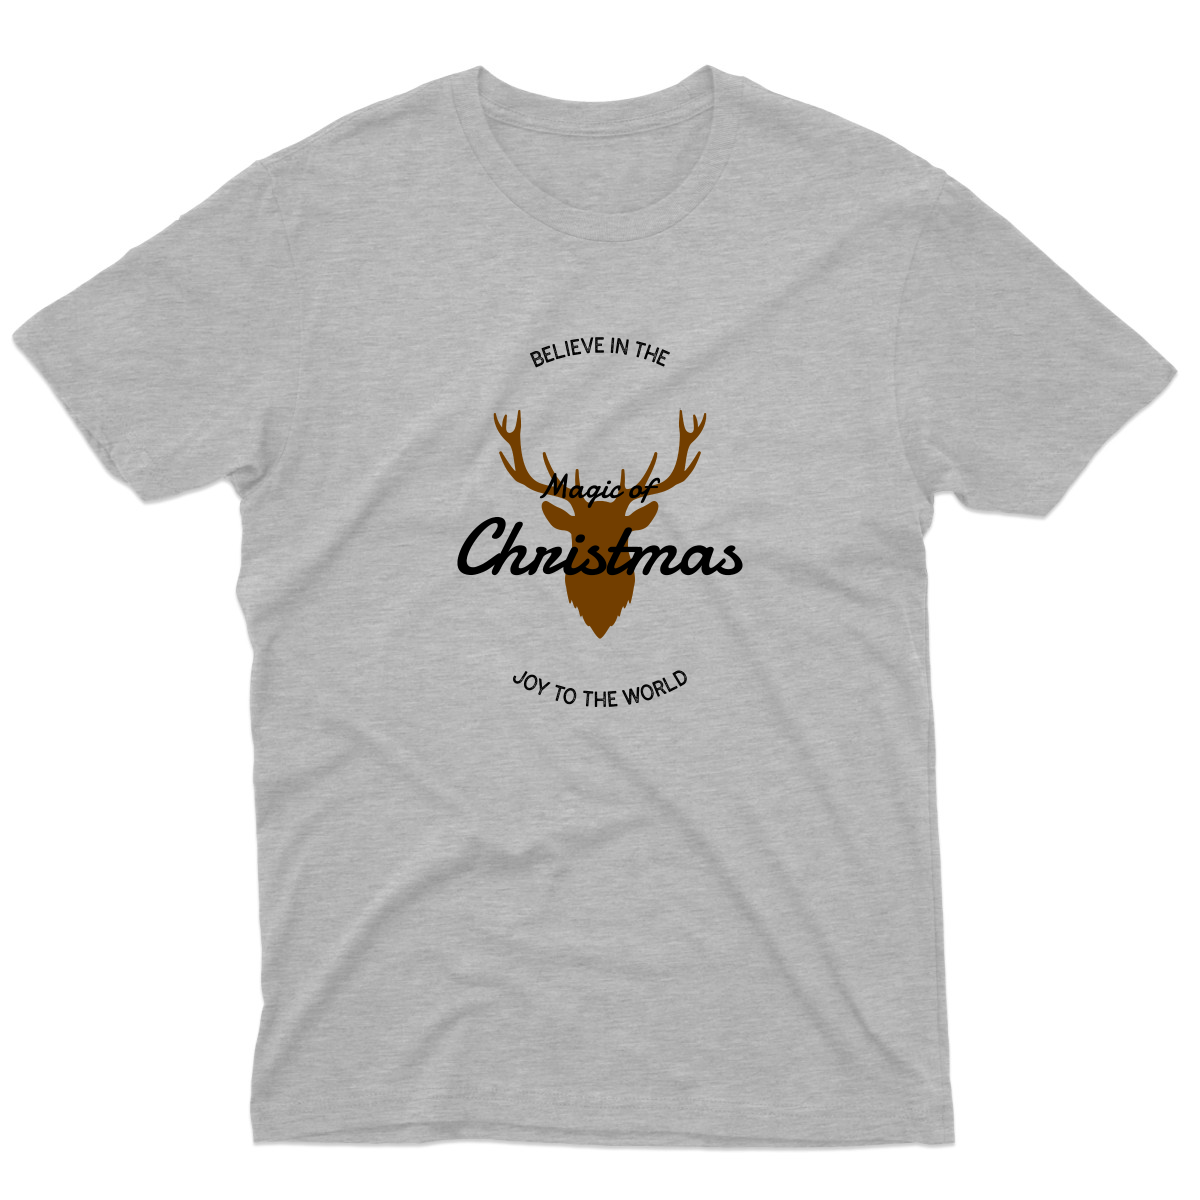 Believe in the Magic of Christmas Joy to the World Men's T-shirt | Gray